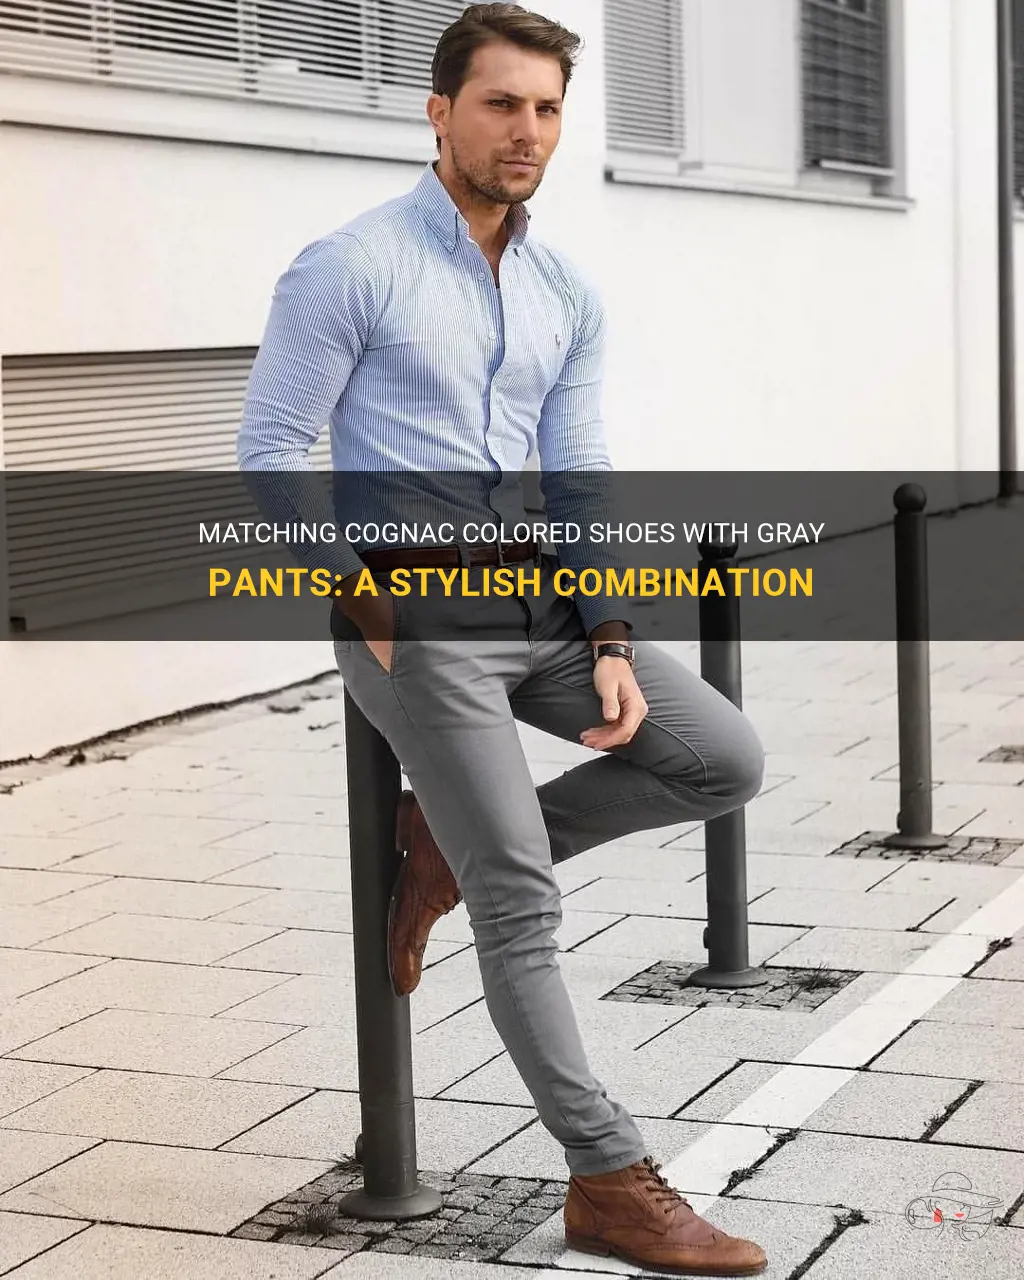 Matching Cognac Colored Shoes With Gray Pants: A Stylish Combination ...